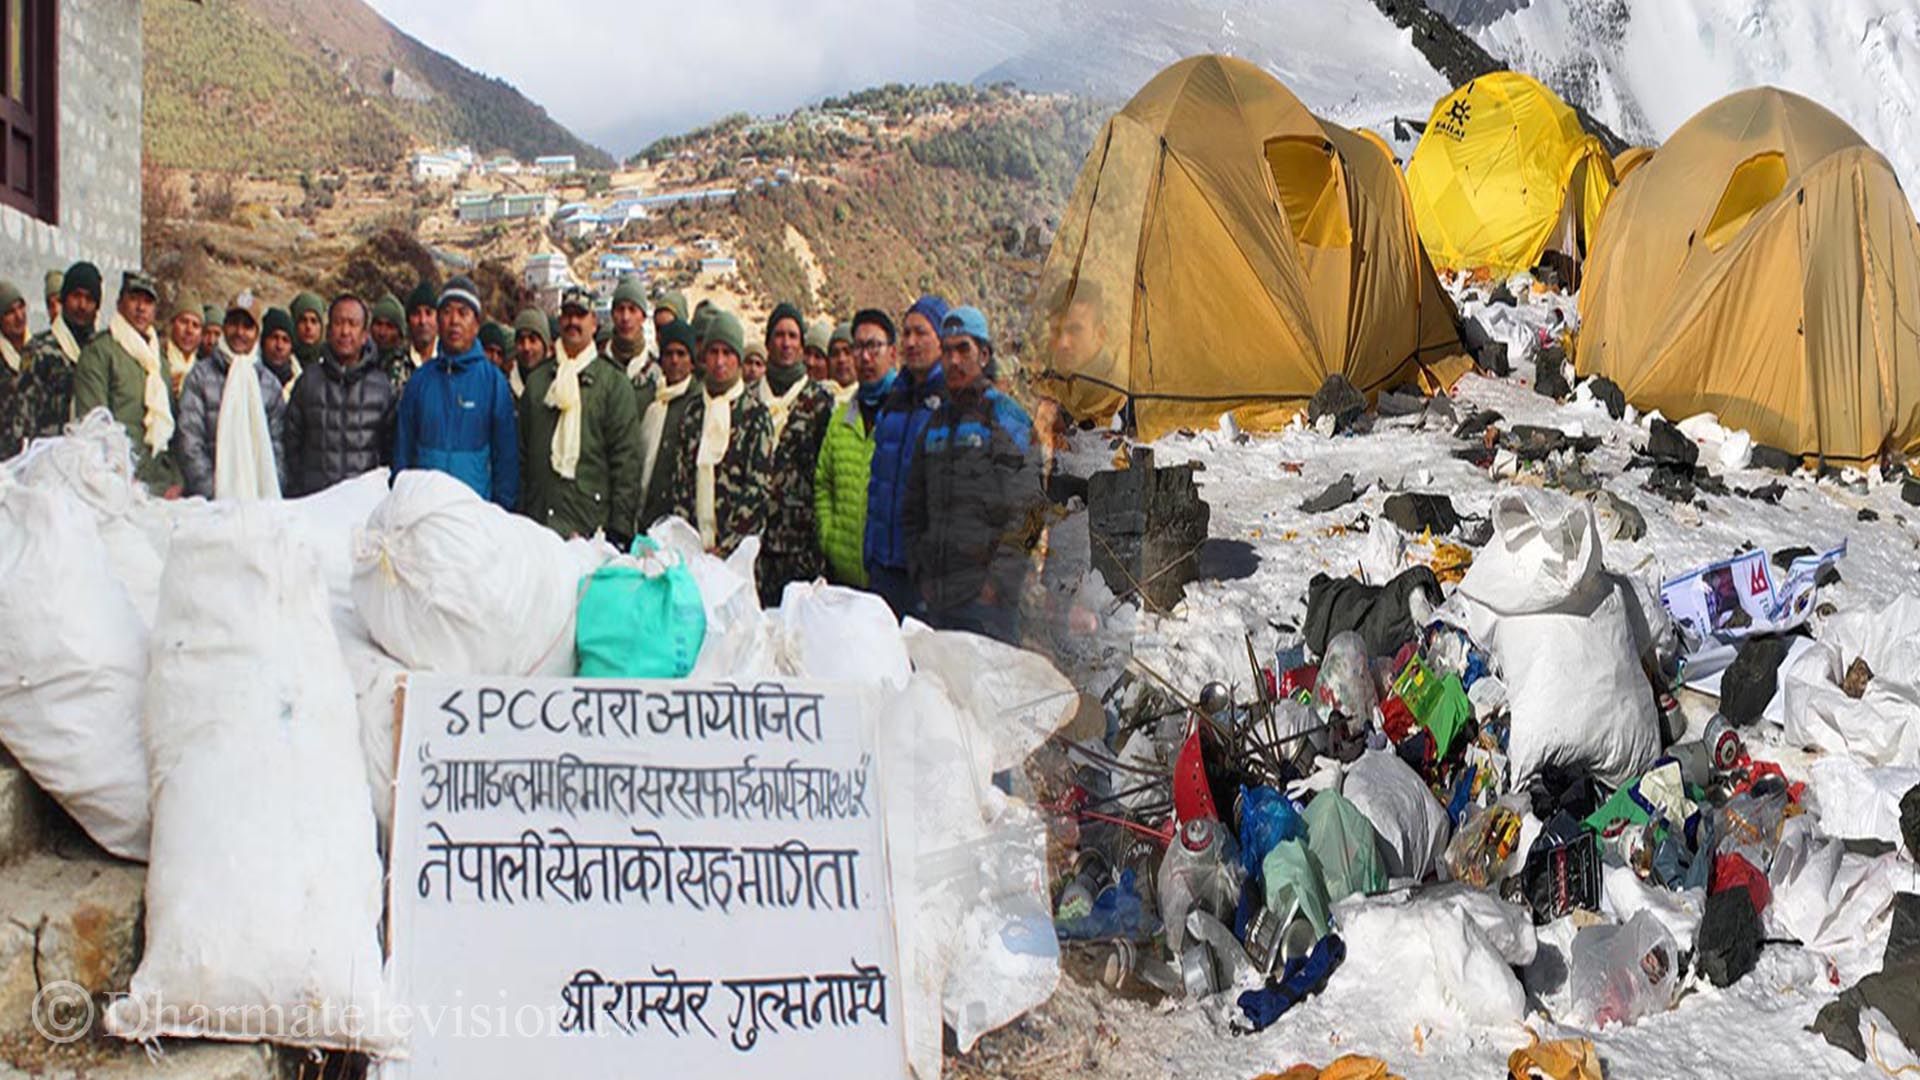 Nepal Army going to collect garbage from 5 different mountains in Clean Mountain Campaign